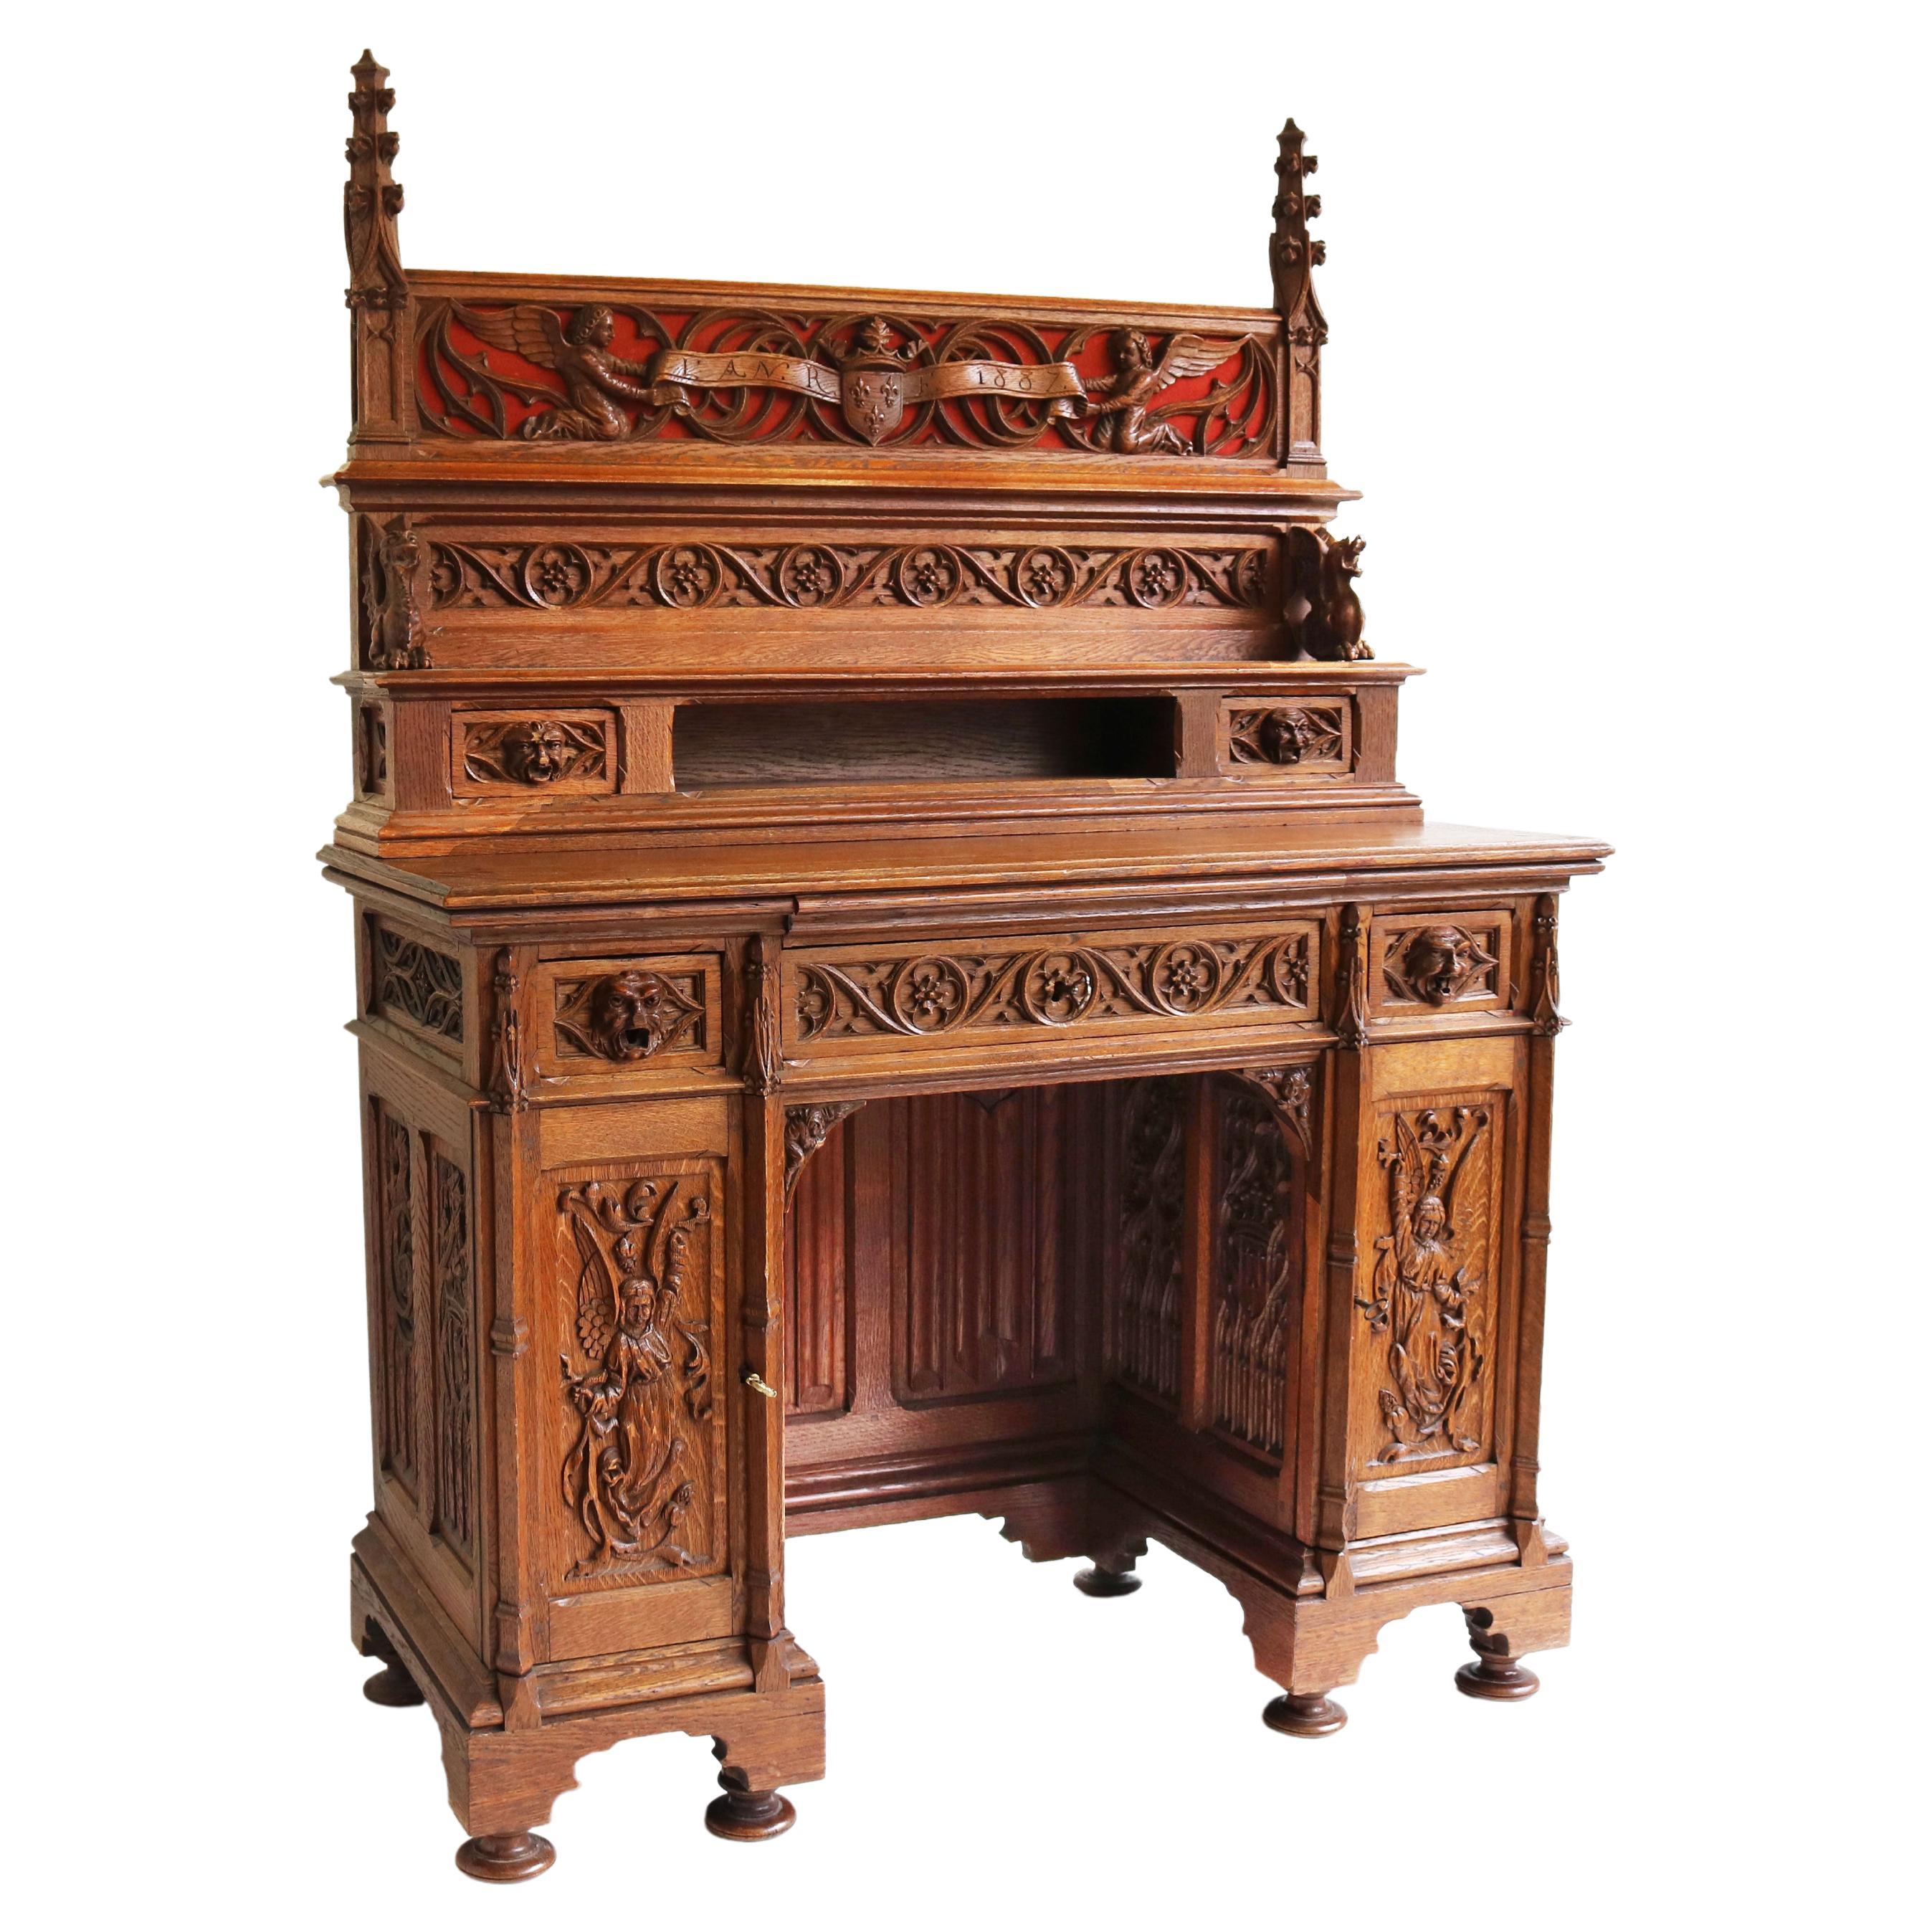 Rare Gothic Revival Writing Desk Carved Oak Antique 19th Century Angels Dragons